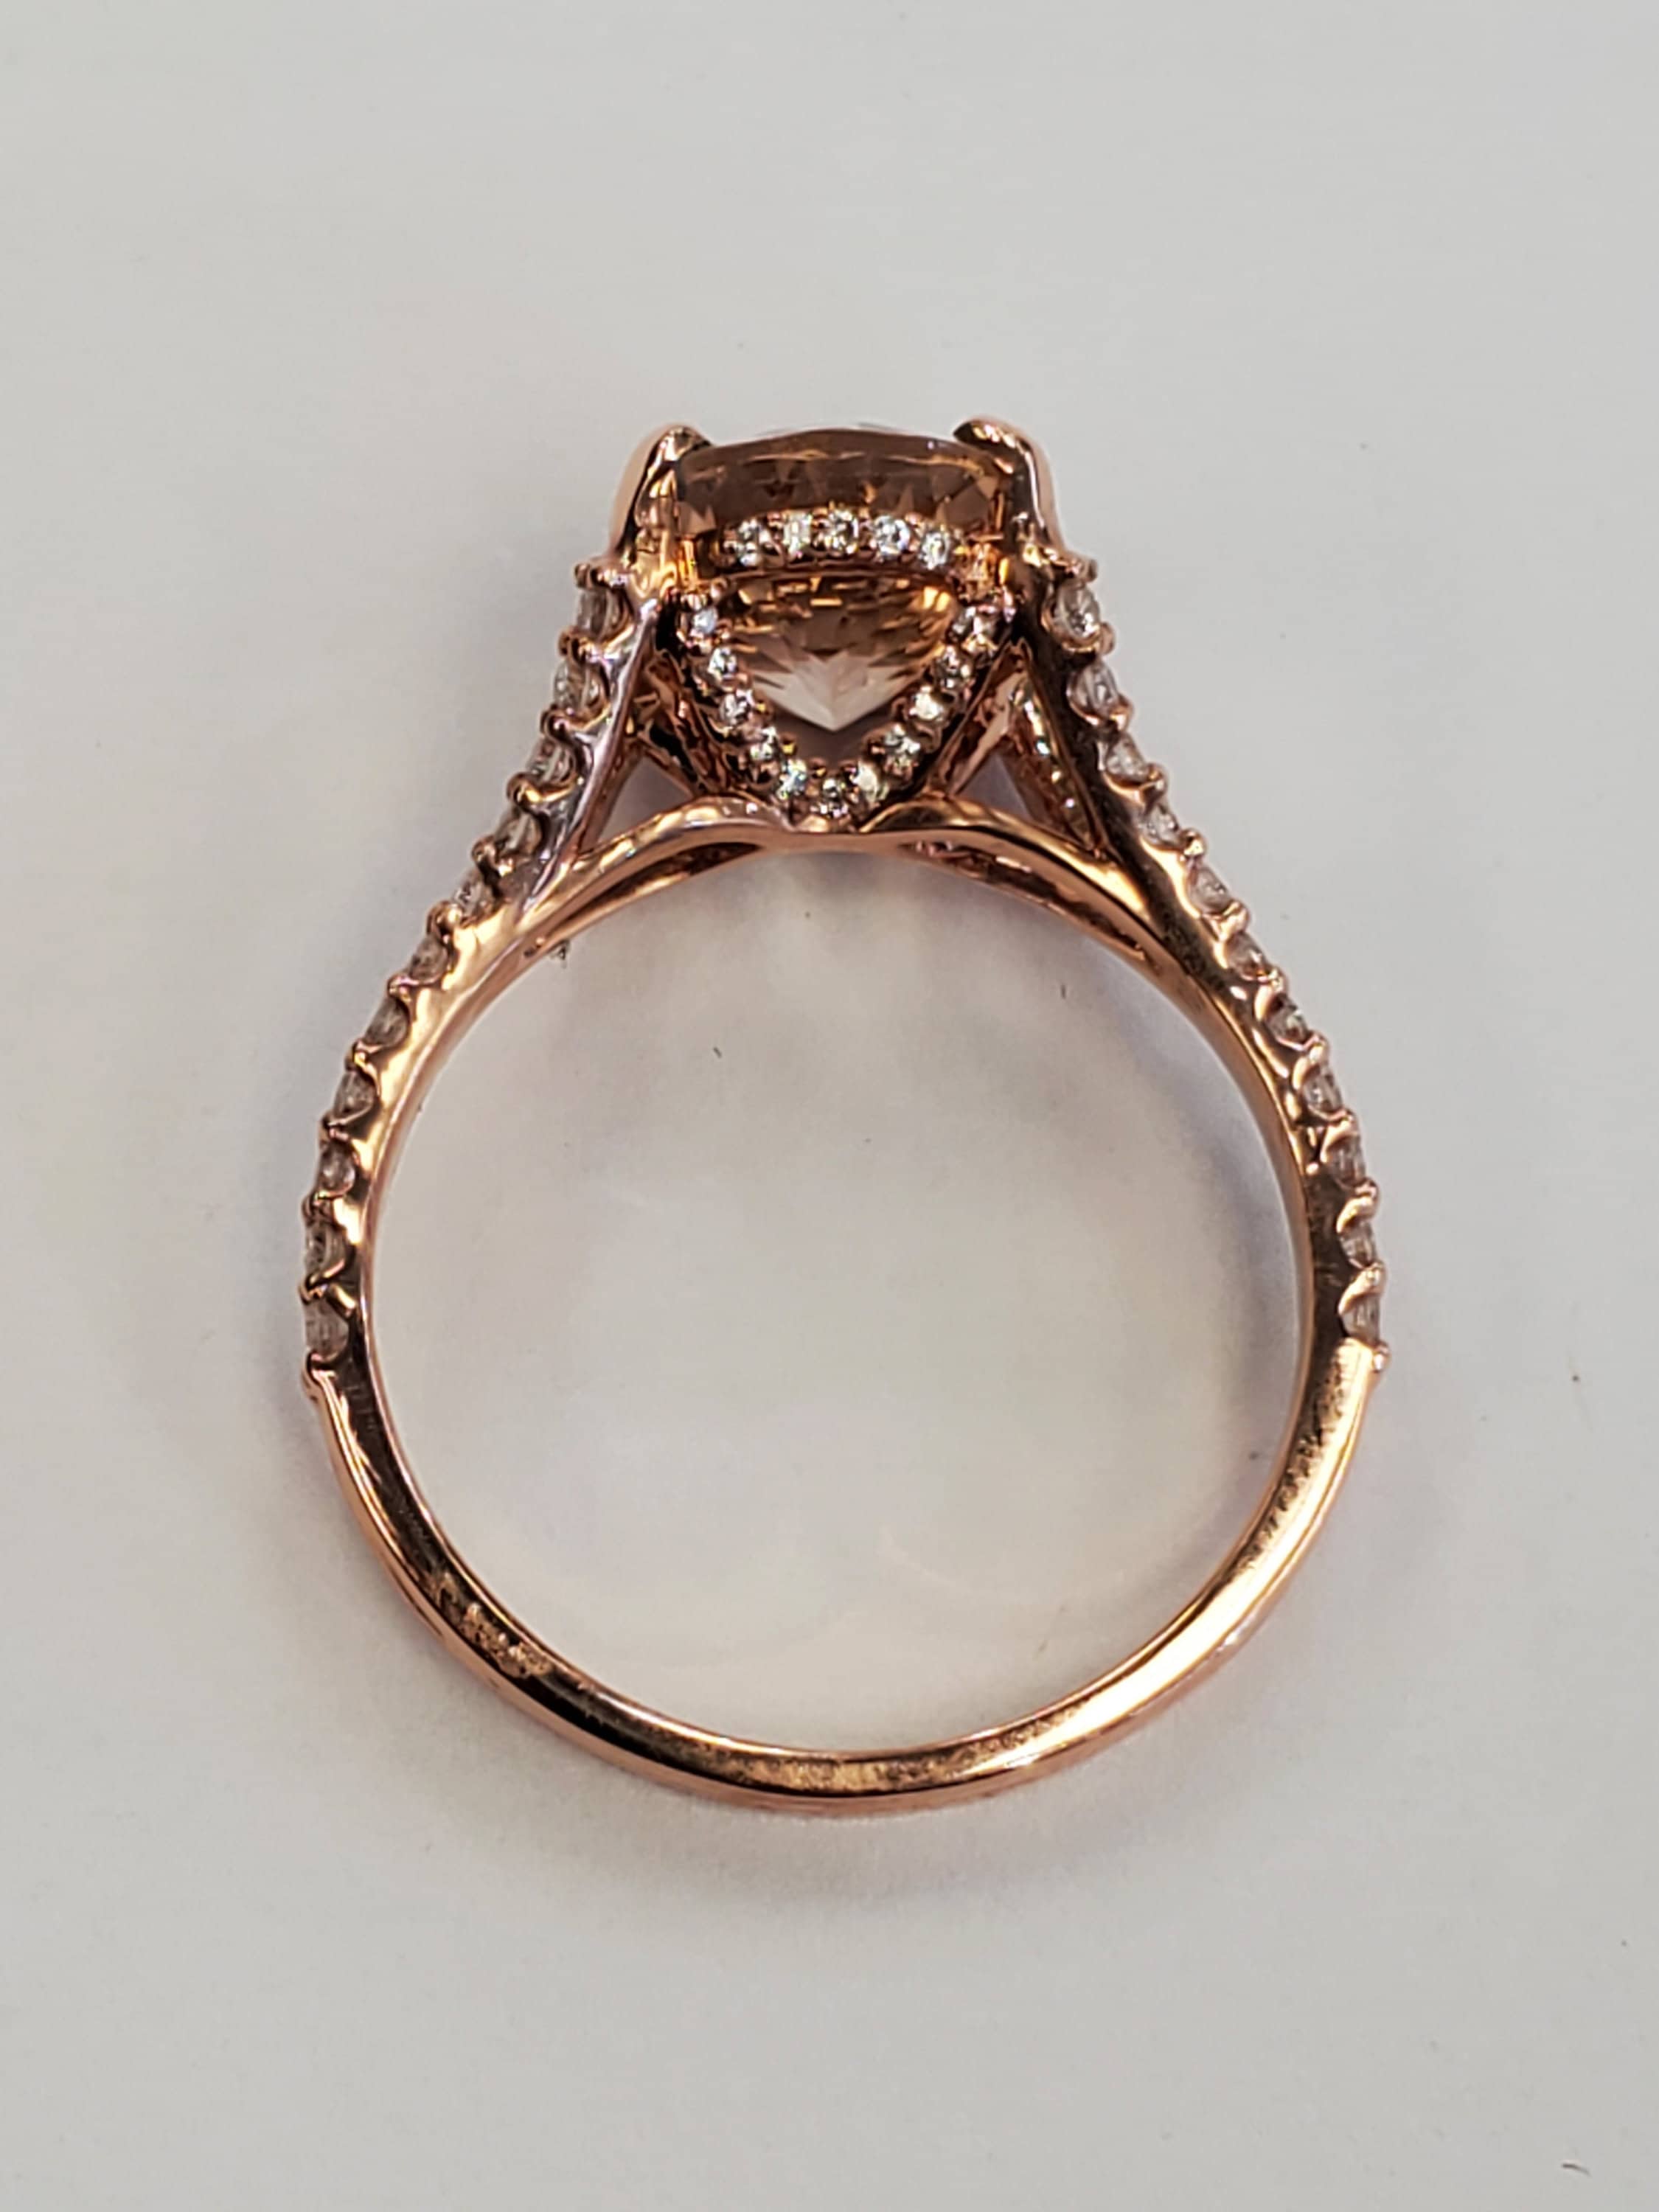 Product Image for 14k Rose Gold 2.50ct Morganite Oval Split Shank Ring with Diamonds size 7.5